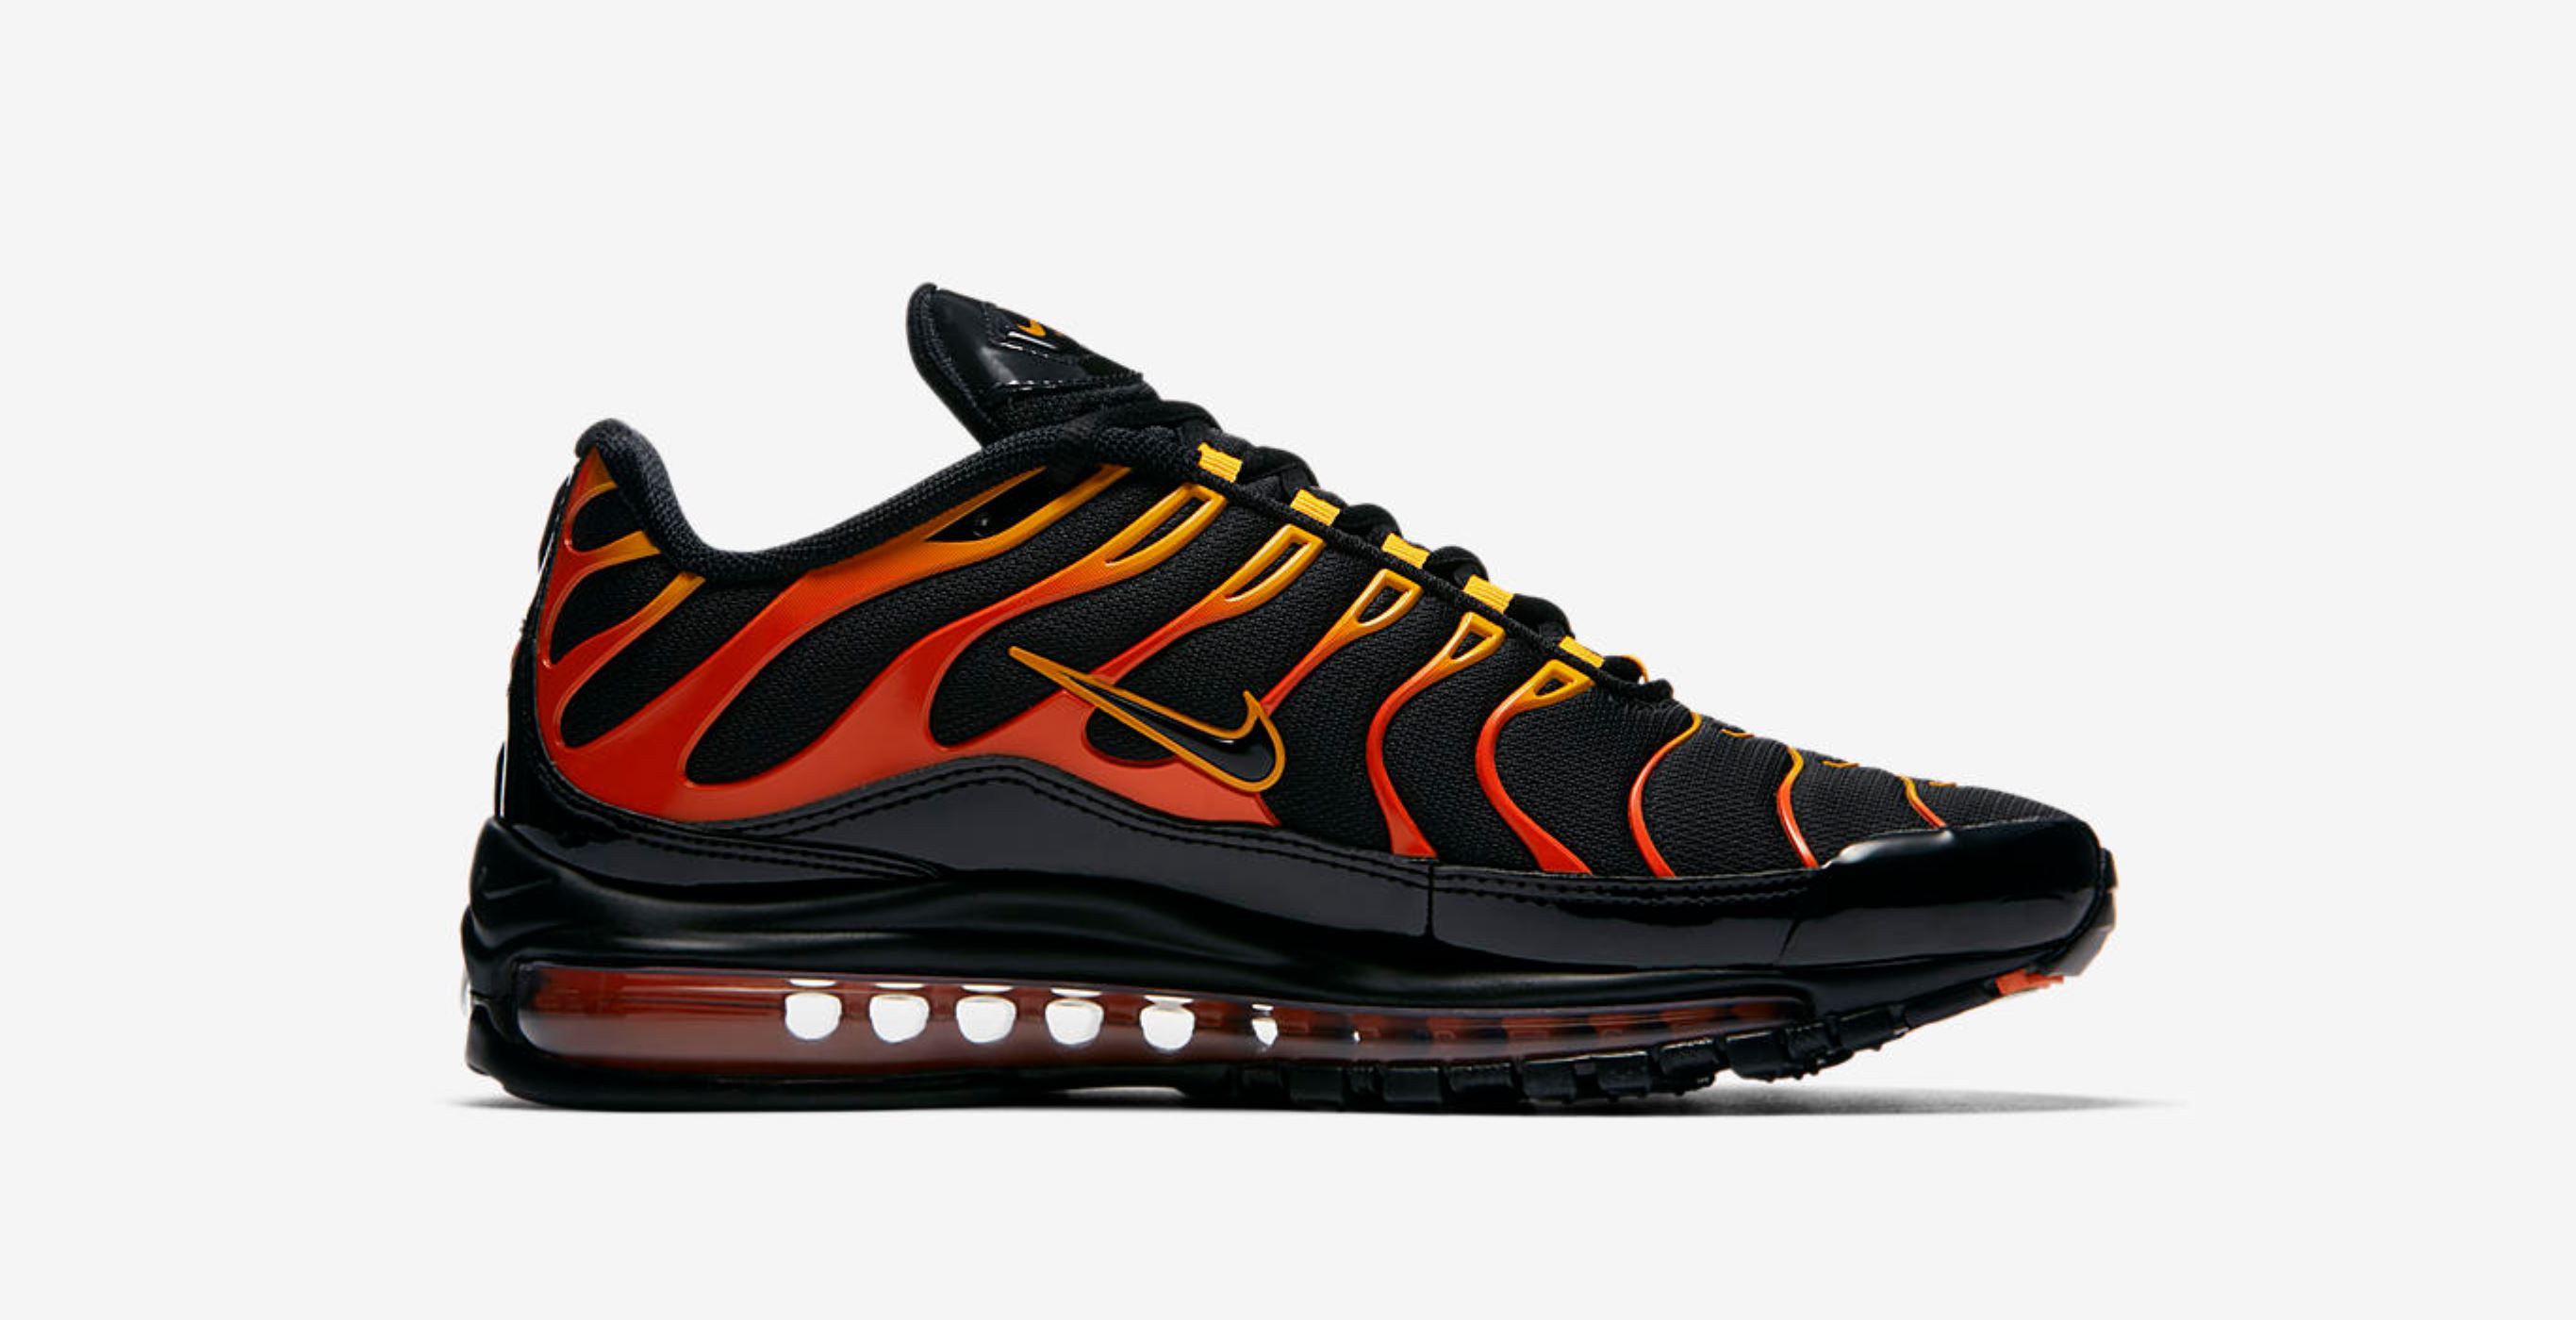 crisis Omleiden loyaliteit Flame On with the Nike Air Max Plus 97 'Shock Orange' - WearTesters